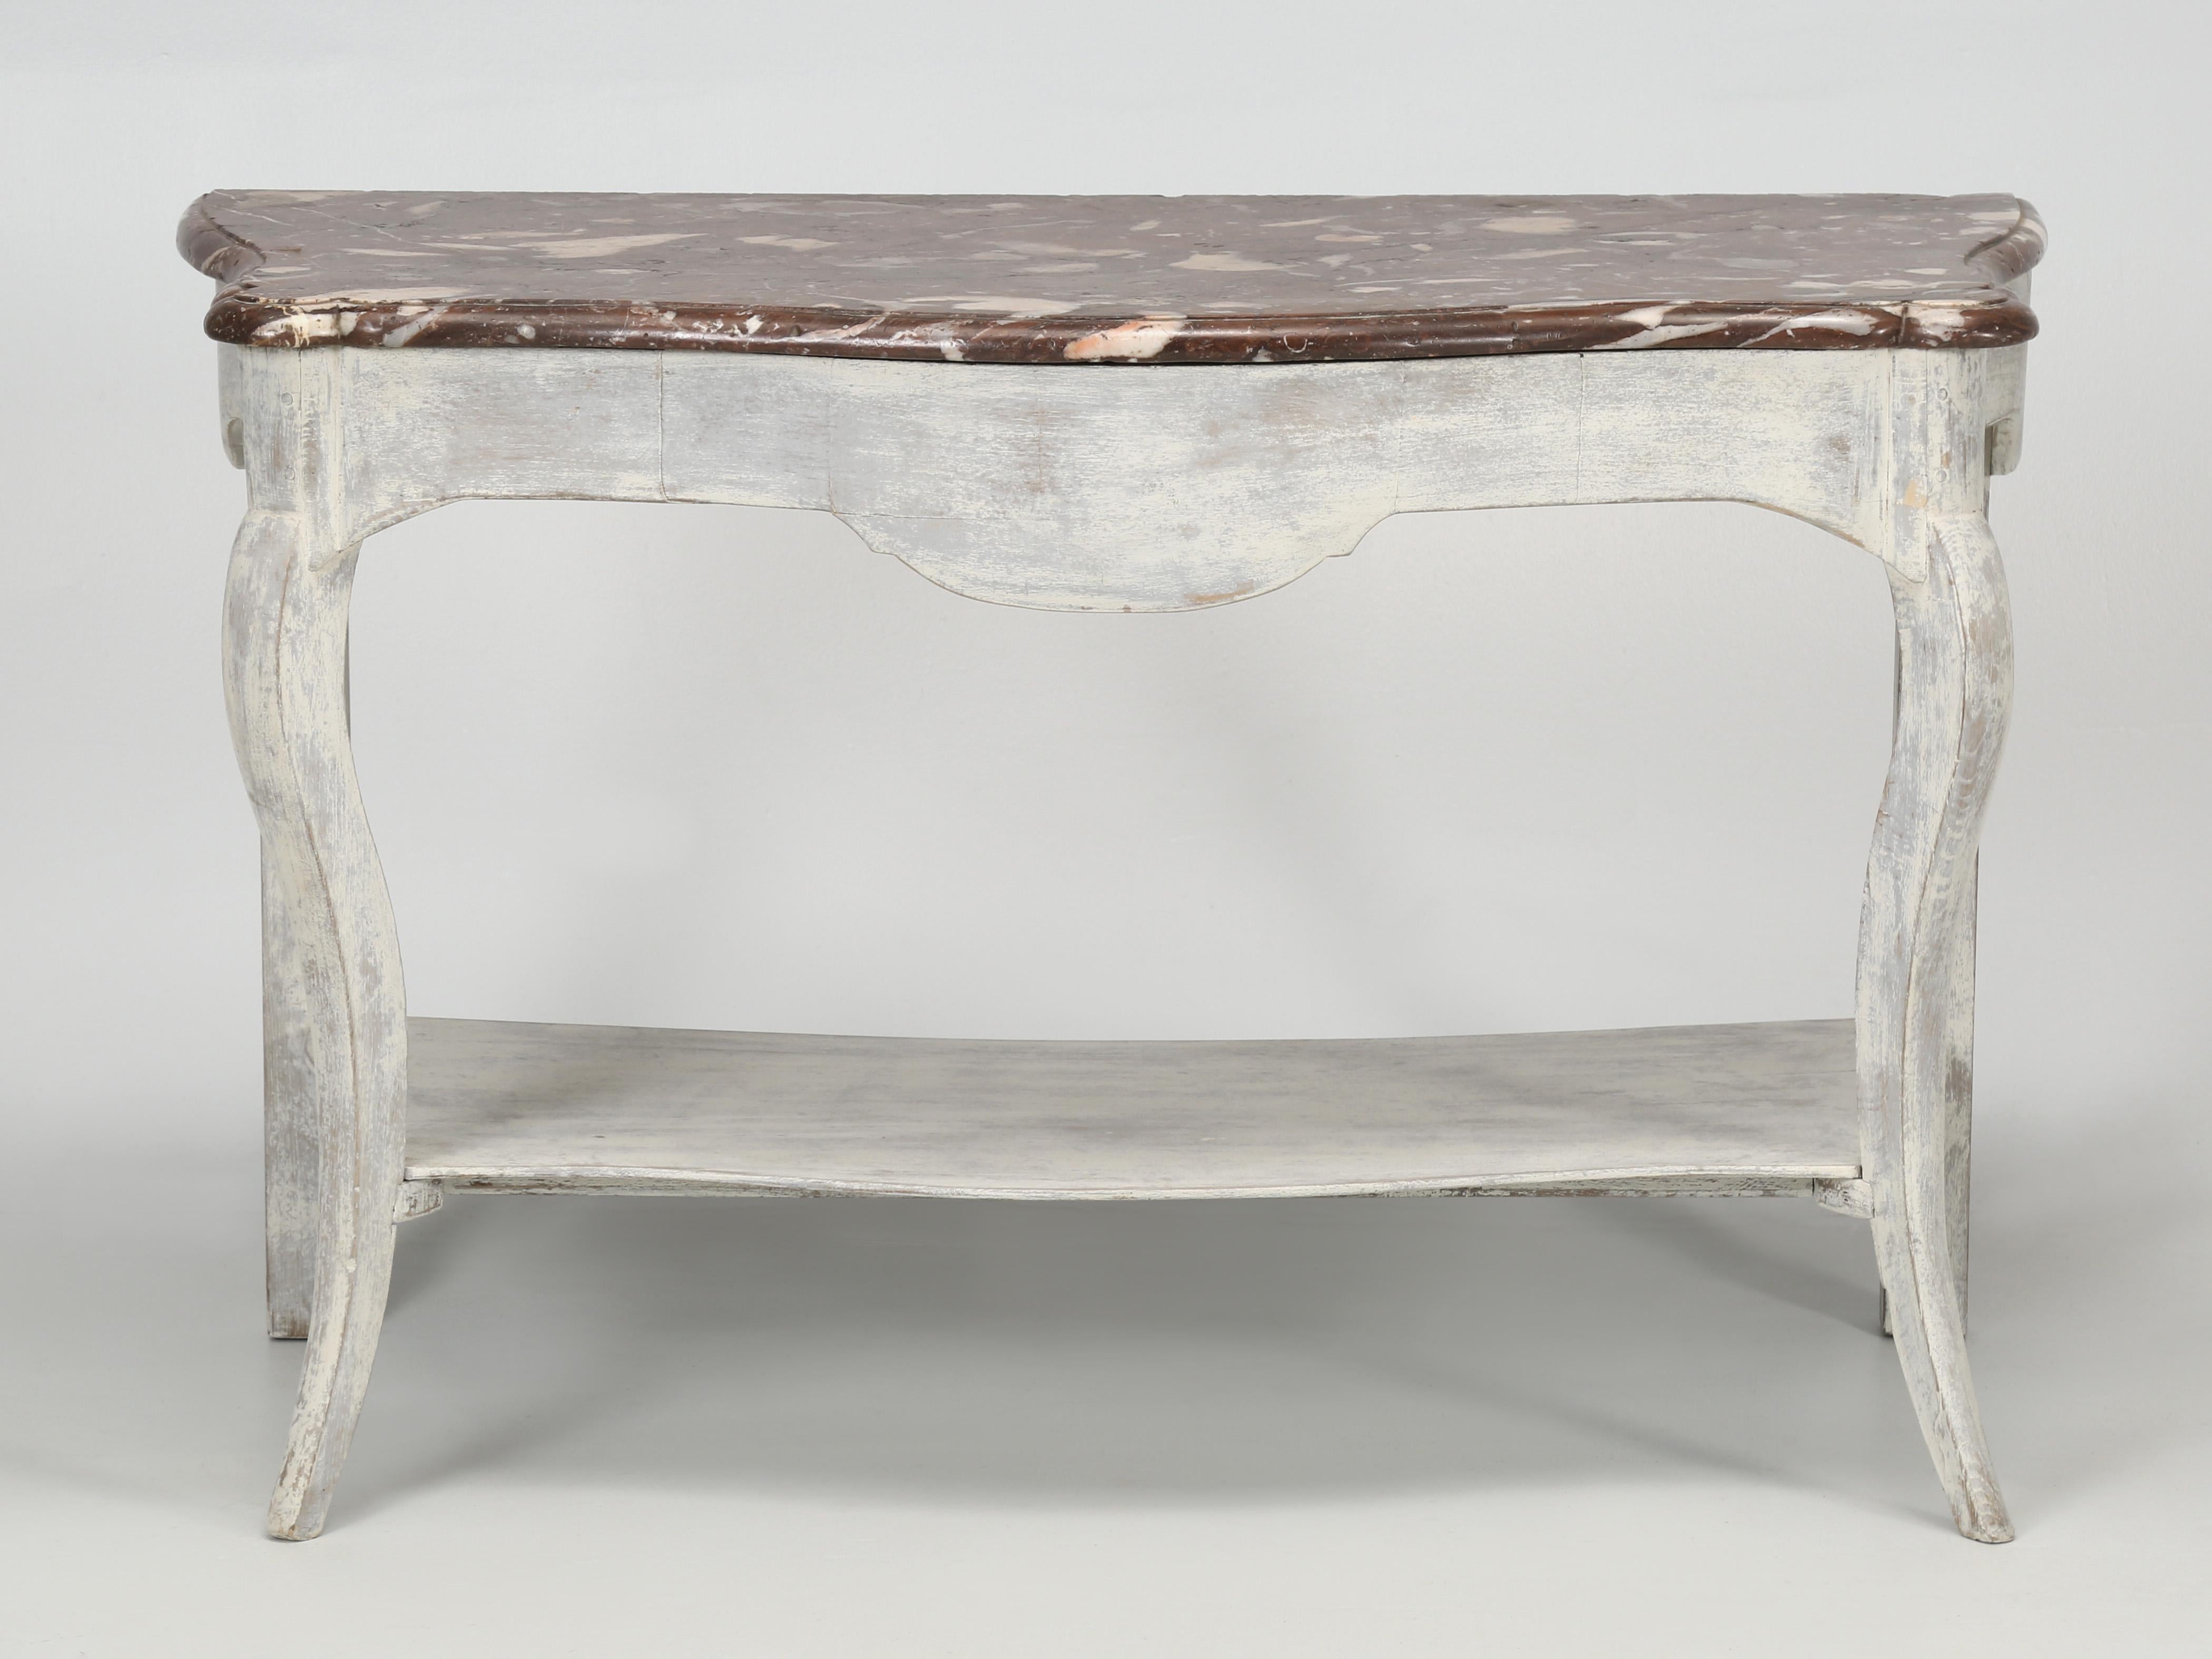 Antique marble console table that was recently sourced from an antique dealer who closed up, so our knowledge is limited as to its originality. What we know for sure, is that the marble top is extremely old and has an incredible patina. There are no